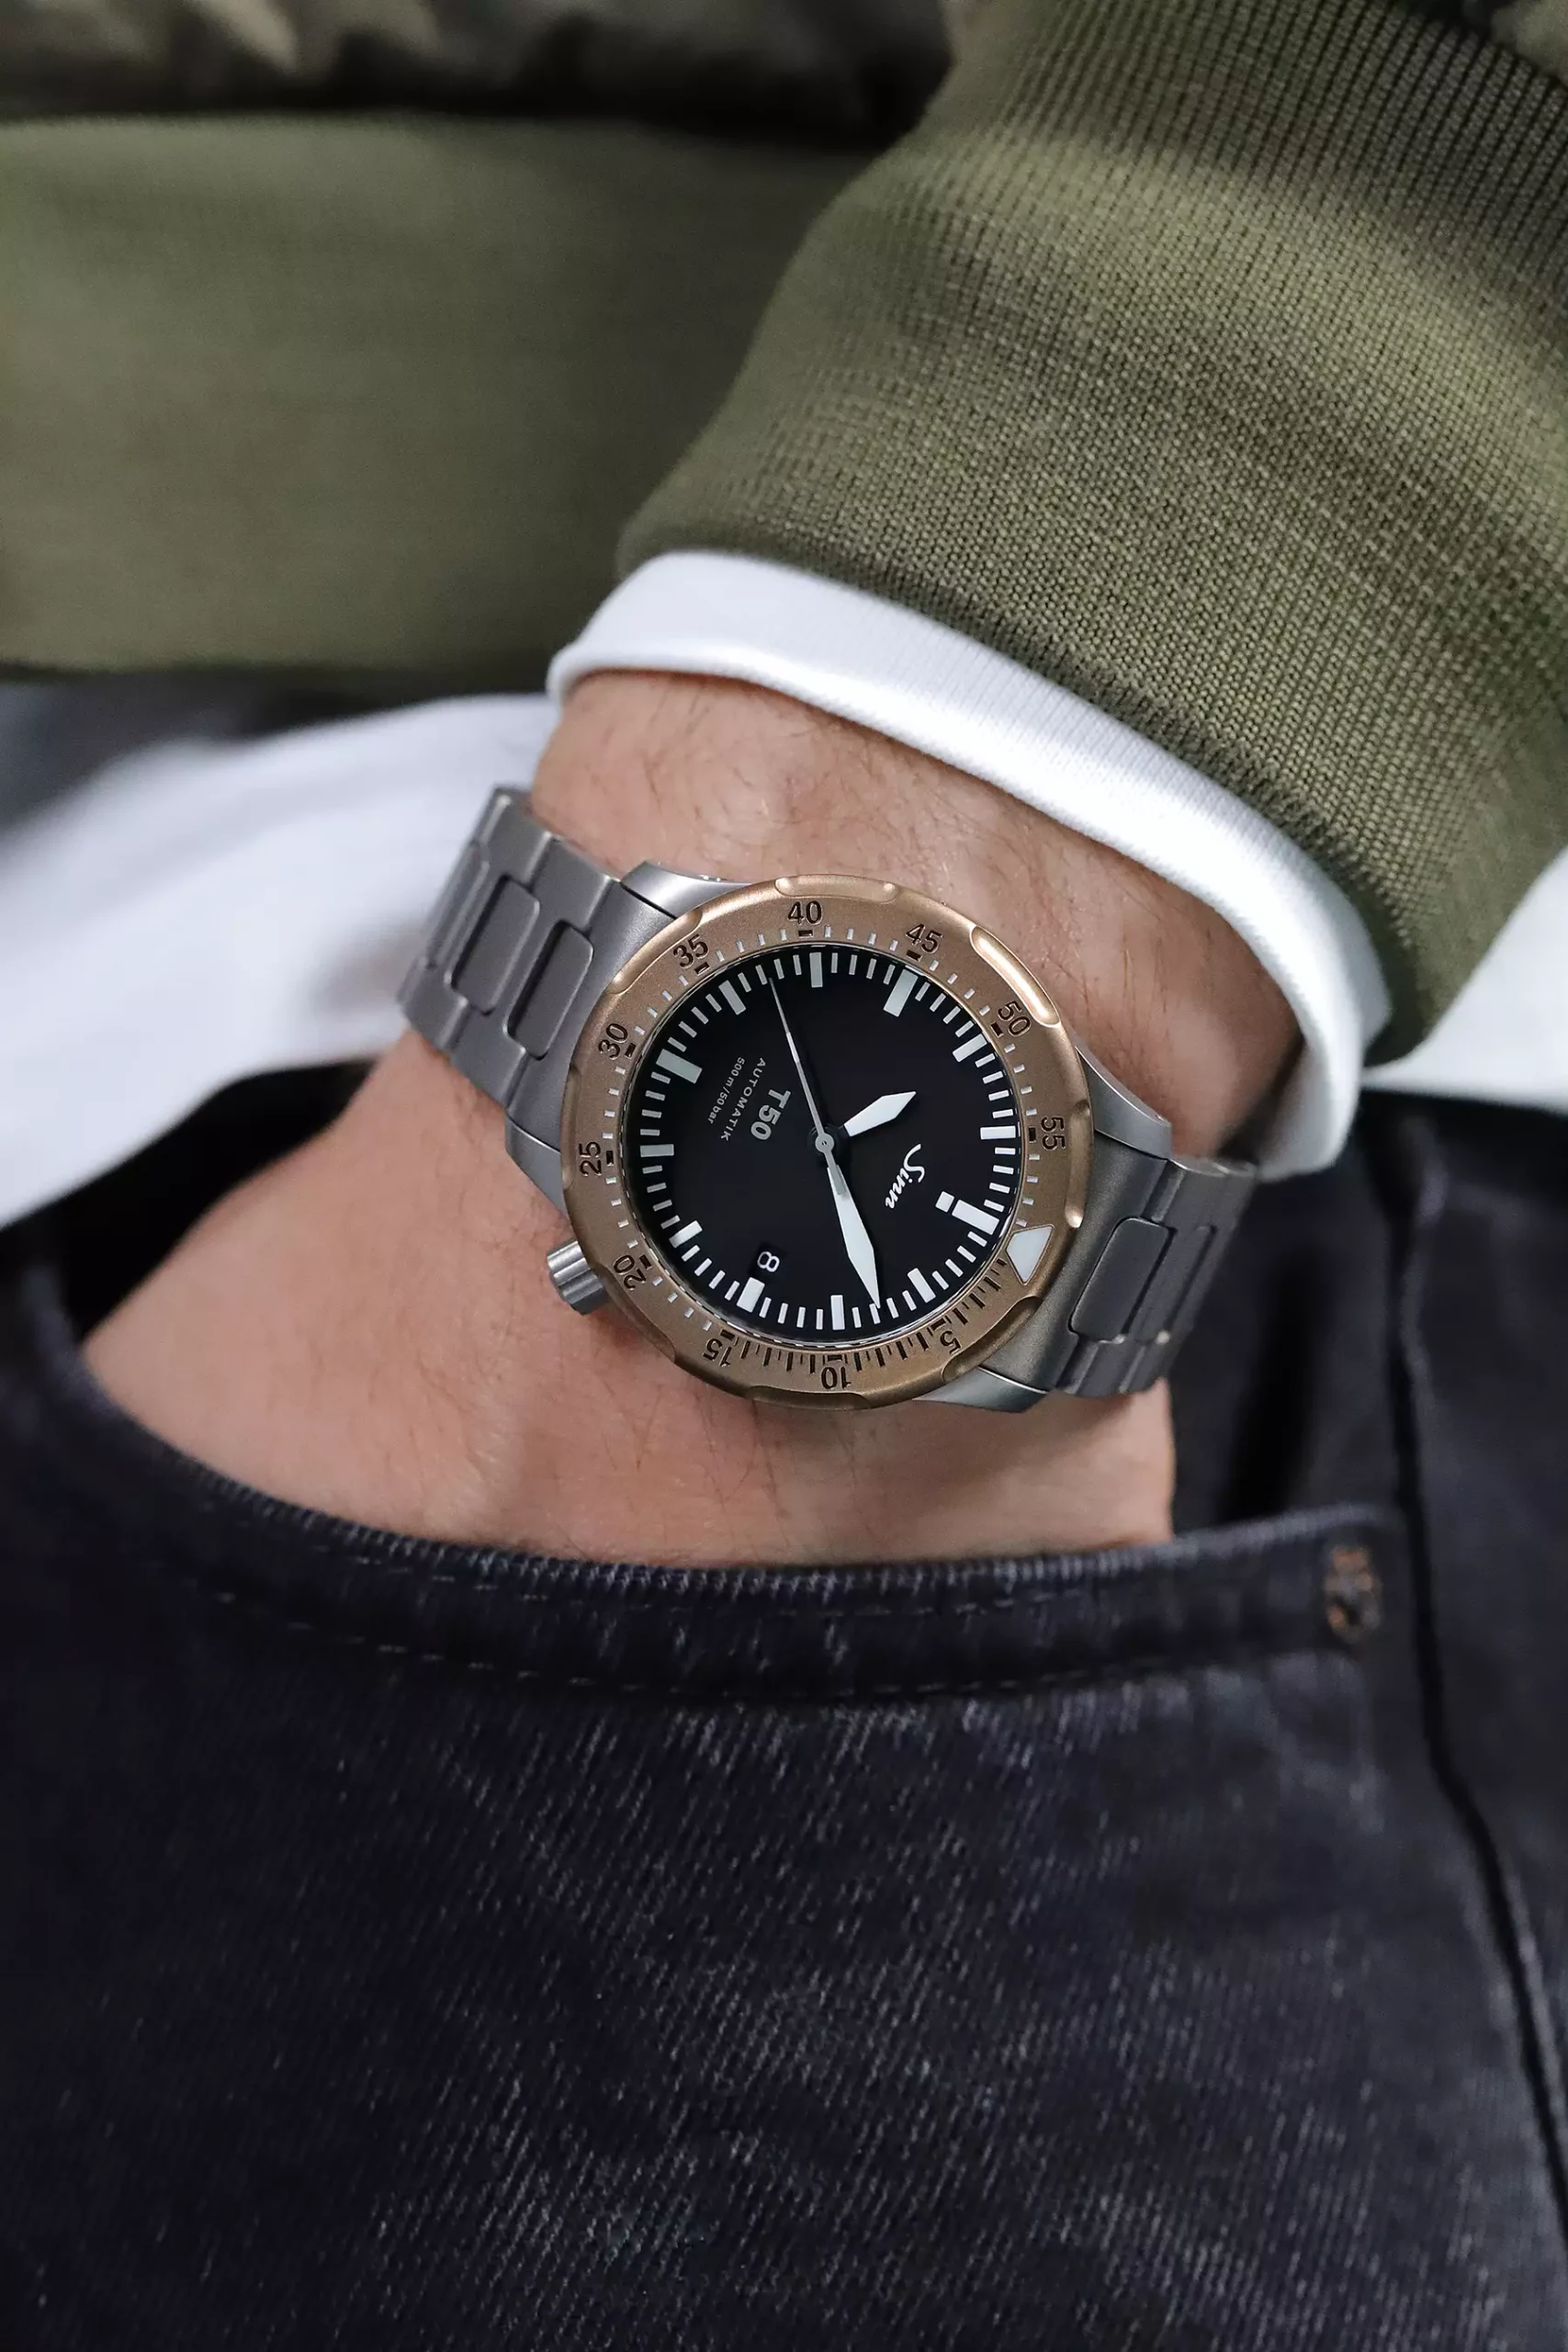 Sinn Goes Full Titanium and Bronze with New T50 Dive Watch